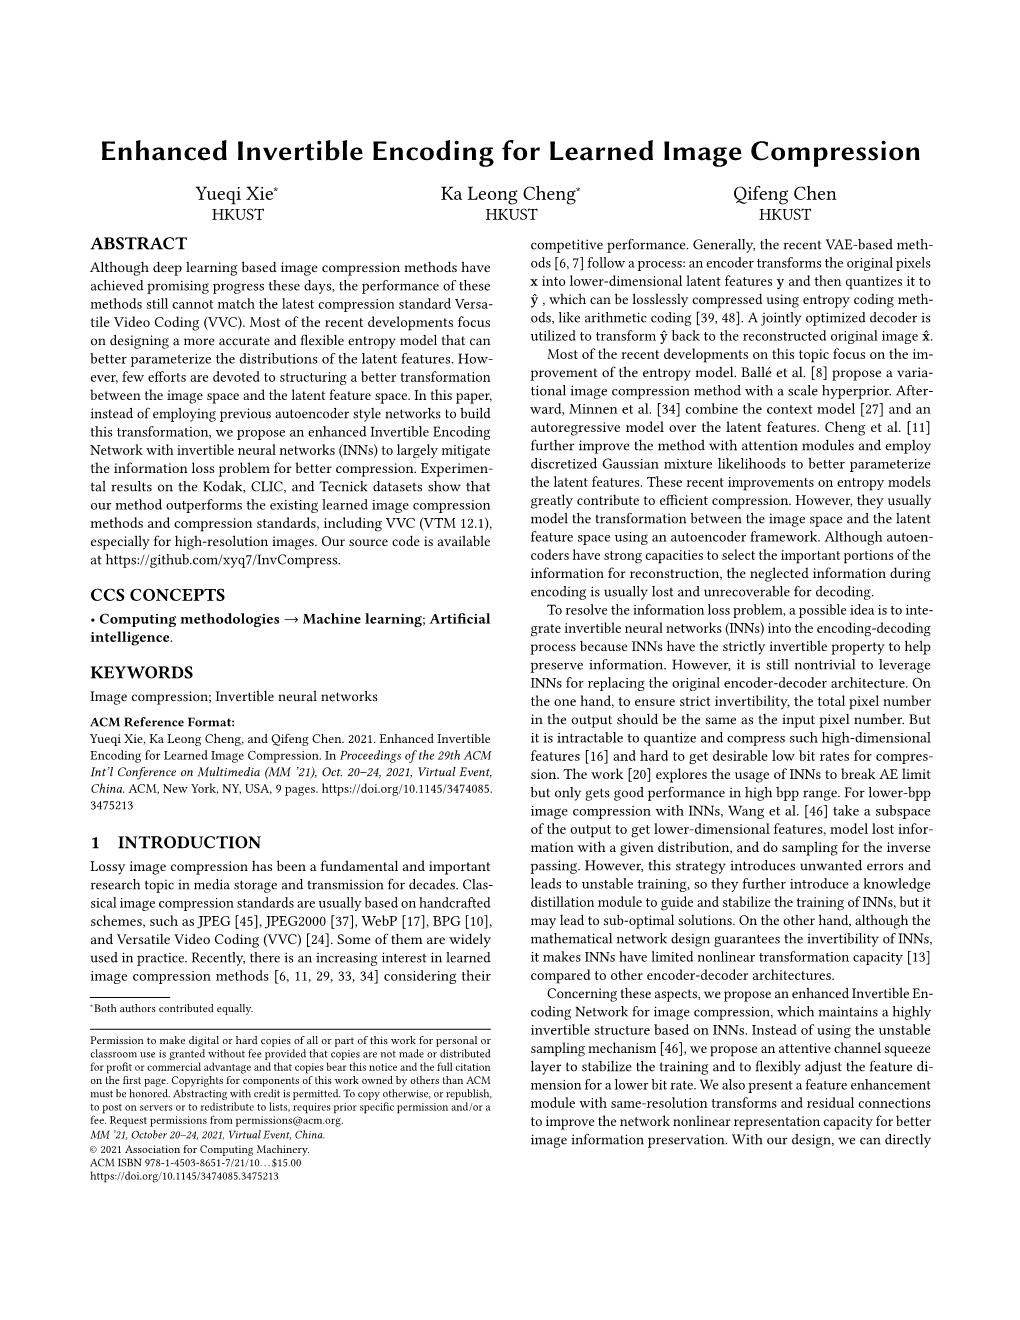 Enhanced Invertible Encoding for Learned Image Compression Yueqi Xie∗ Ka Leong Cheng∗ Qifeng Chen HKUST HKUST HKUST ABSTRACT Competitive Performance